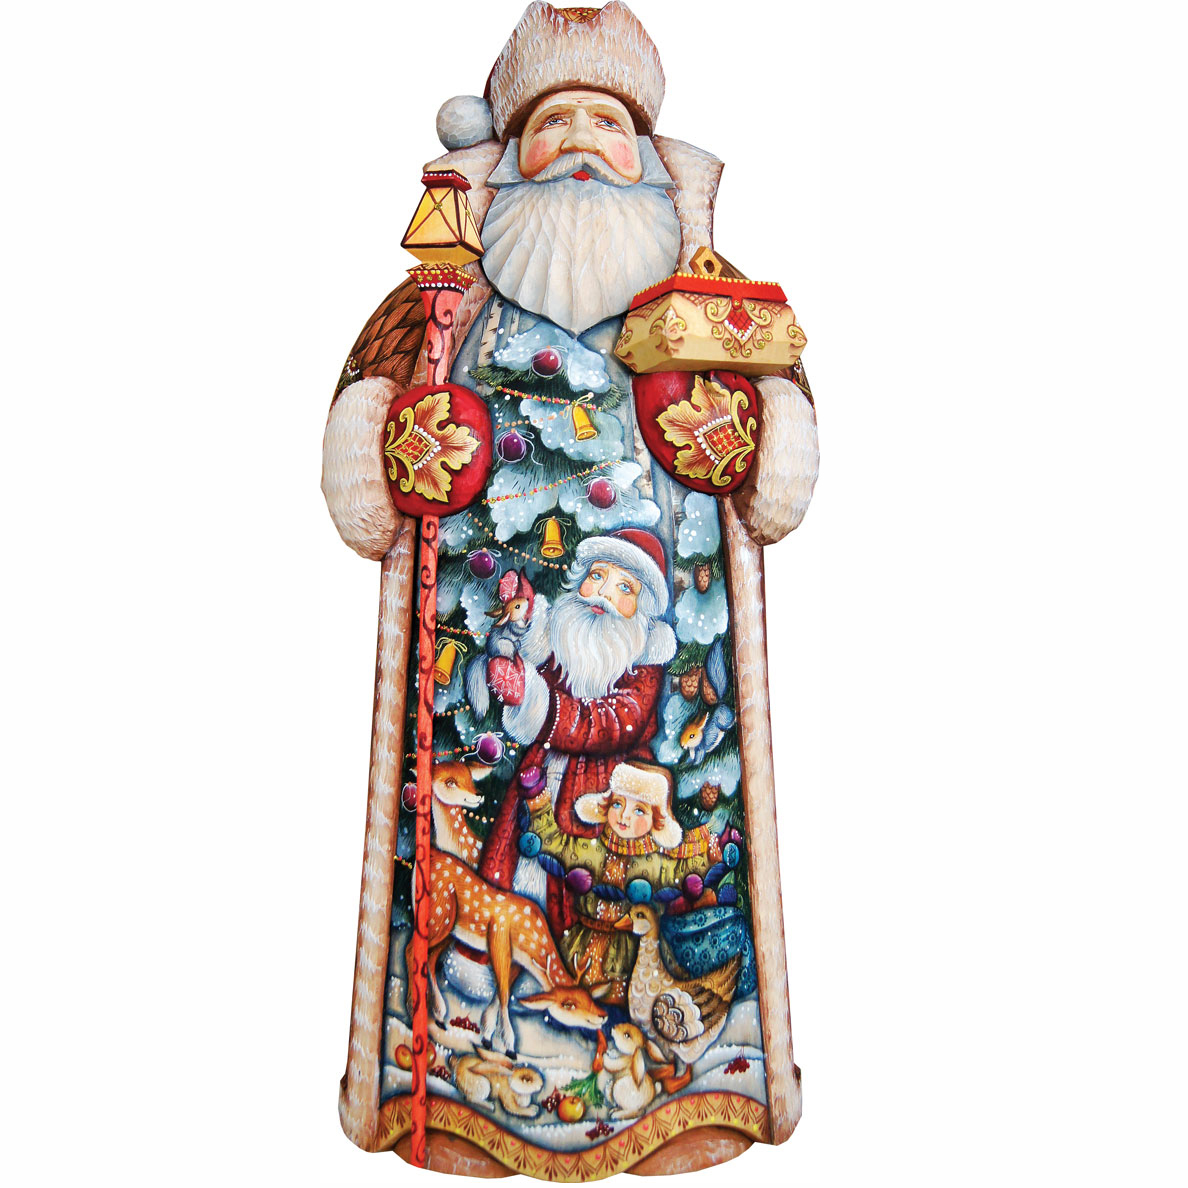 Picture of G.DeBrekht 215626 Delight Wood Carved Hand Painted Santa Clause Figurine